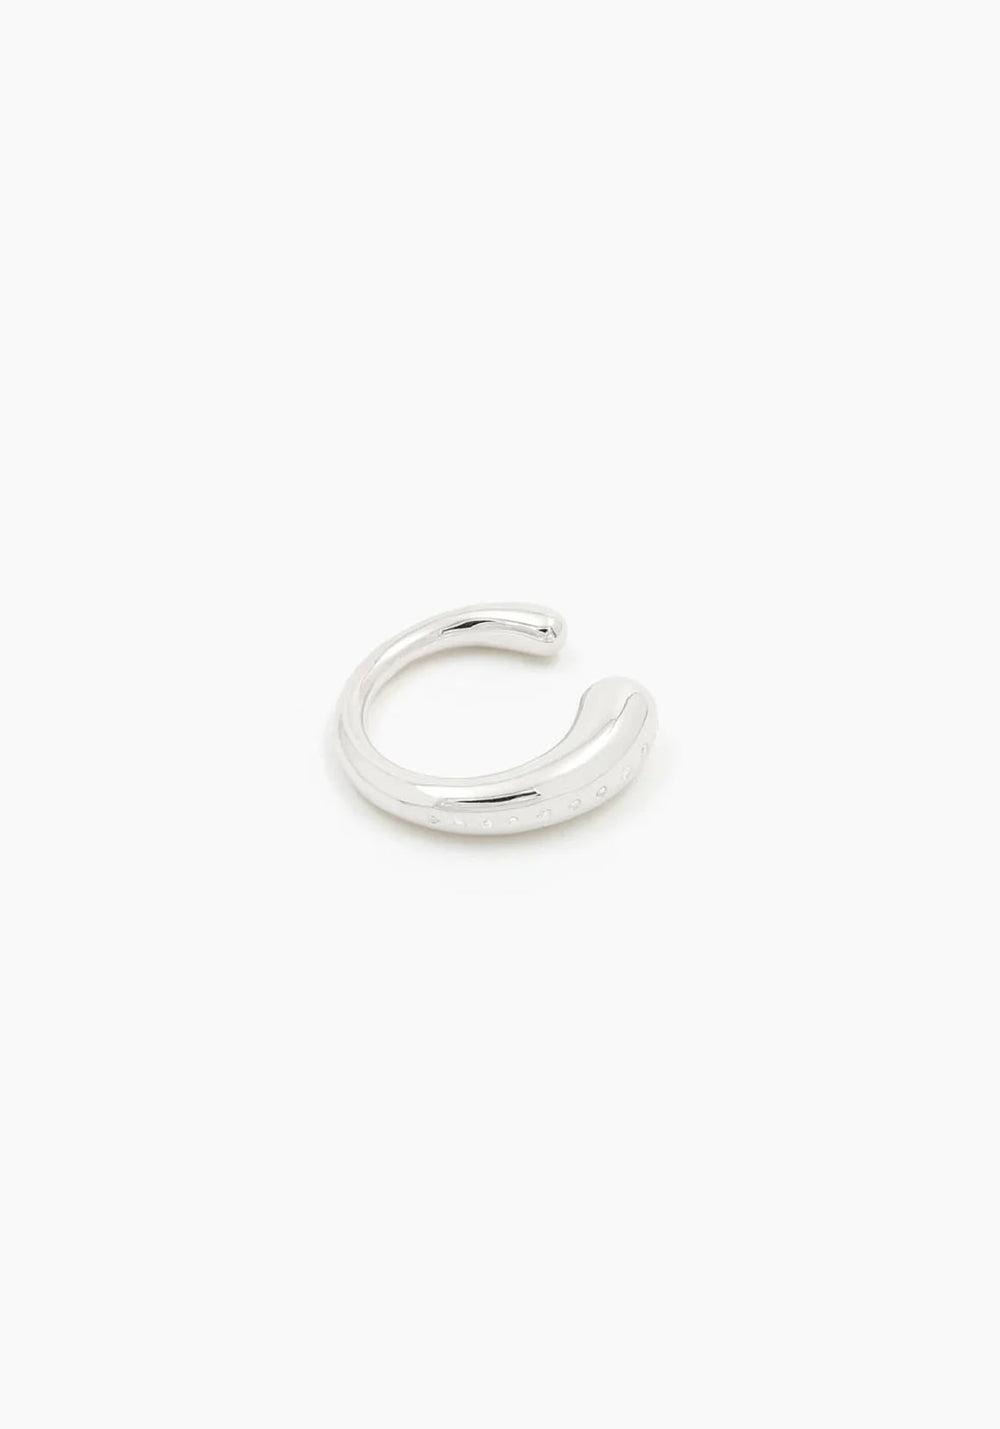 OCULUS 11028 925 STERLING SILVER RING